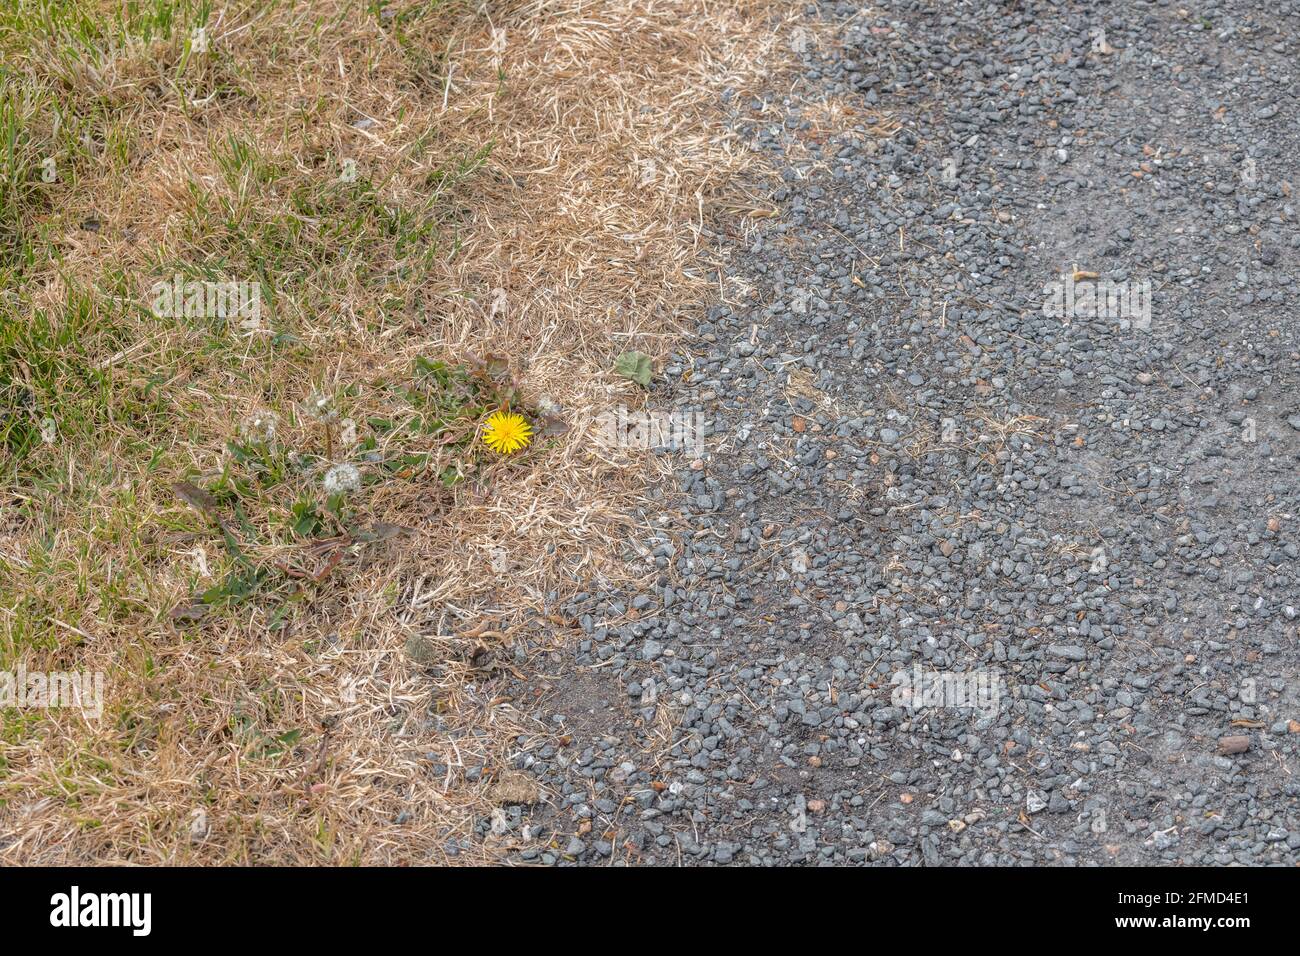 Single yellow Dandelion / Taraxacum officinale flower with copy space growing in tarmac poisoned with weedkiller. Species is an old medicinal plant. Stock Photo